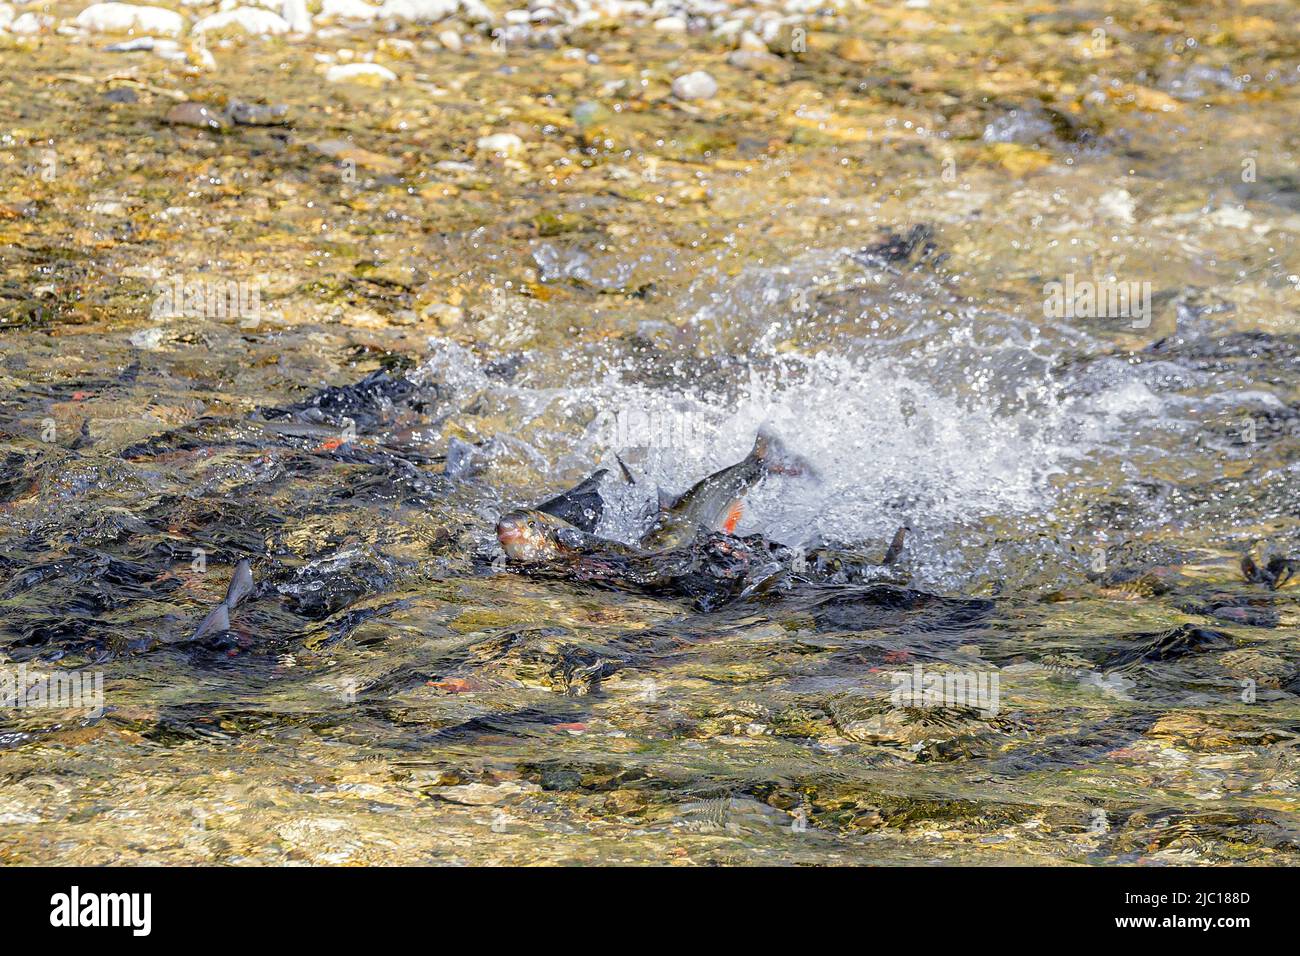 nase (Chondrostoma nasus), spawning, dolphin jump of the female after laying eggs, Germany, Bavaria, Mangfall Stock Photo